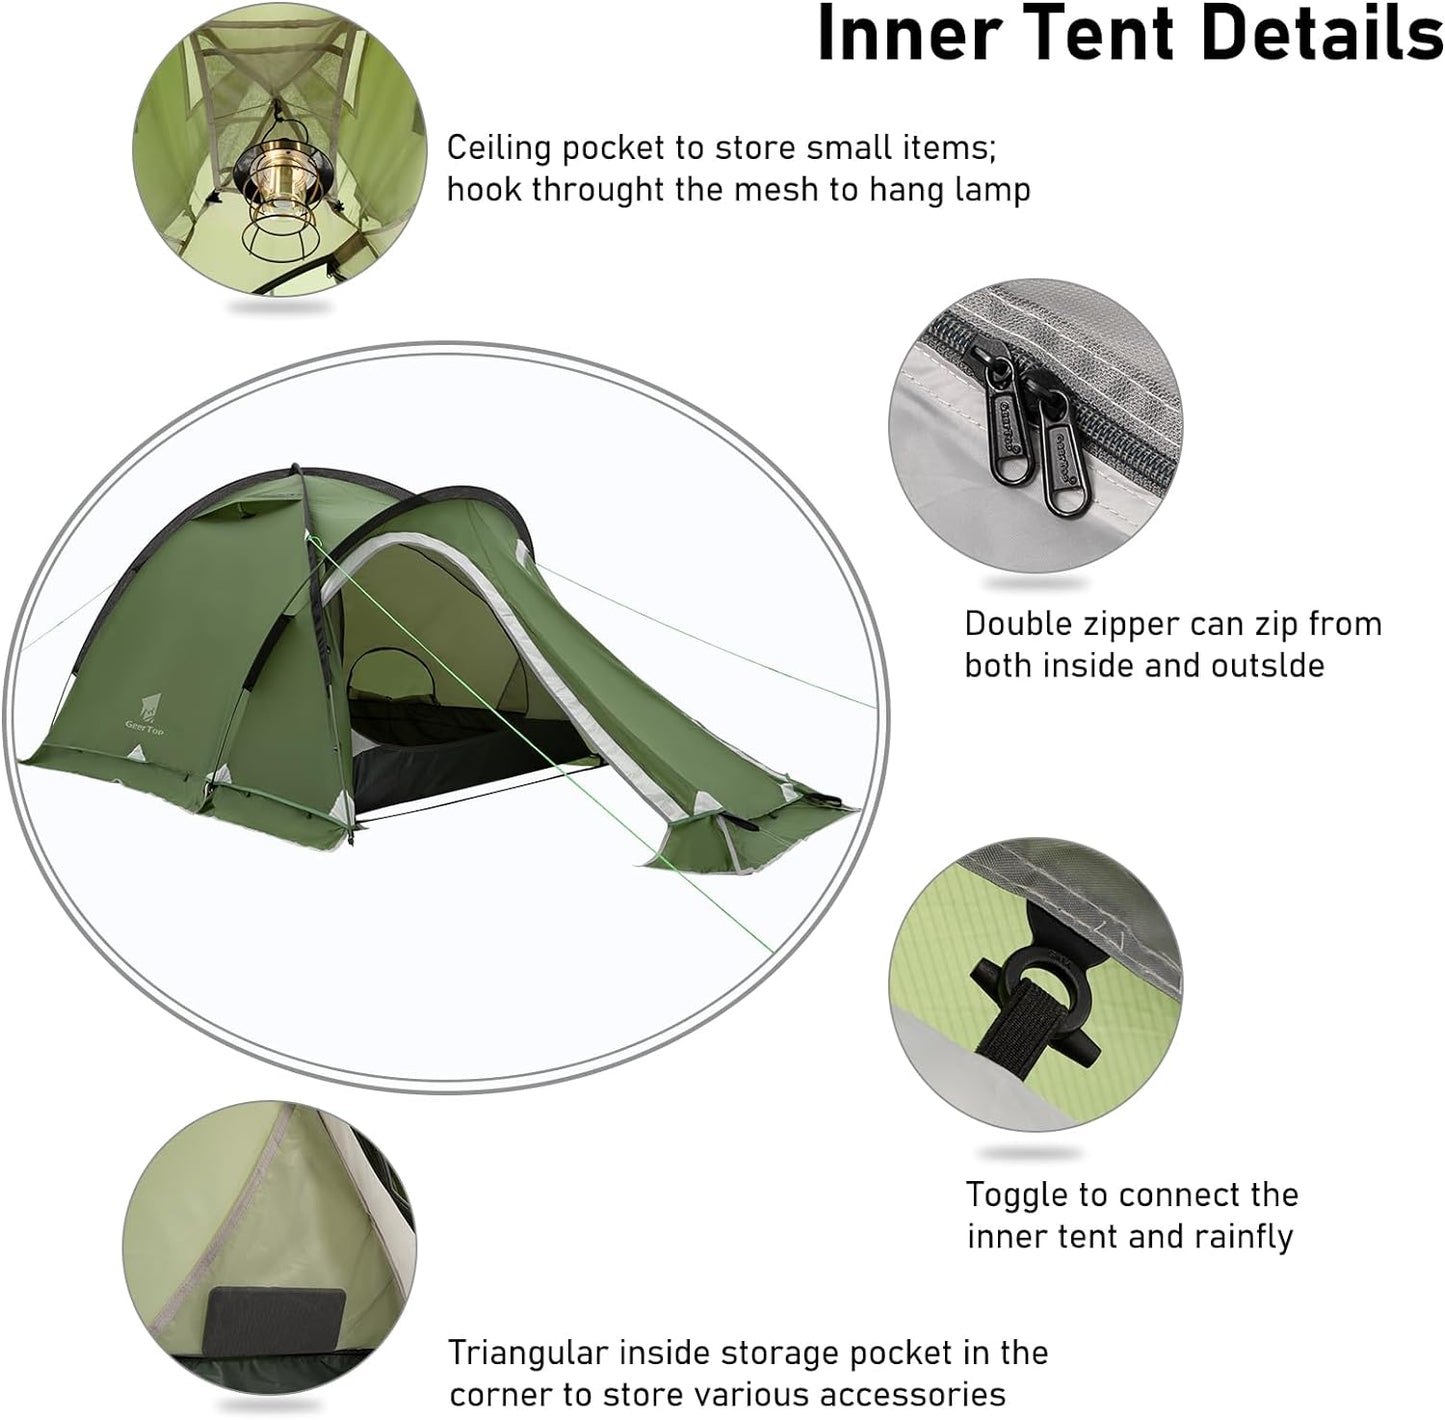 Geertop Portable 2 Person 4 Season Tent Waterproof Backpacking Tent Double Layer All Weather for Camping Hiking Travel Climbing Mountaineering - Easy Set Up